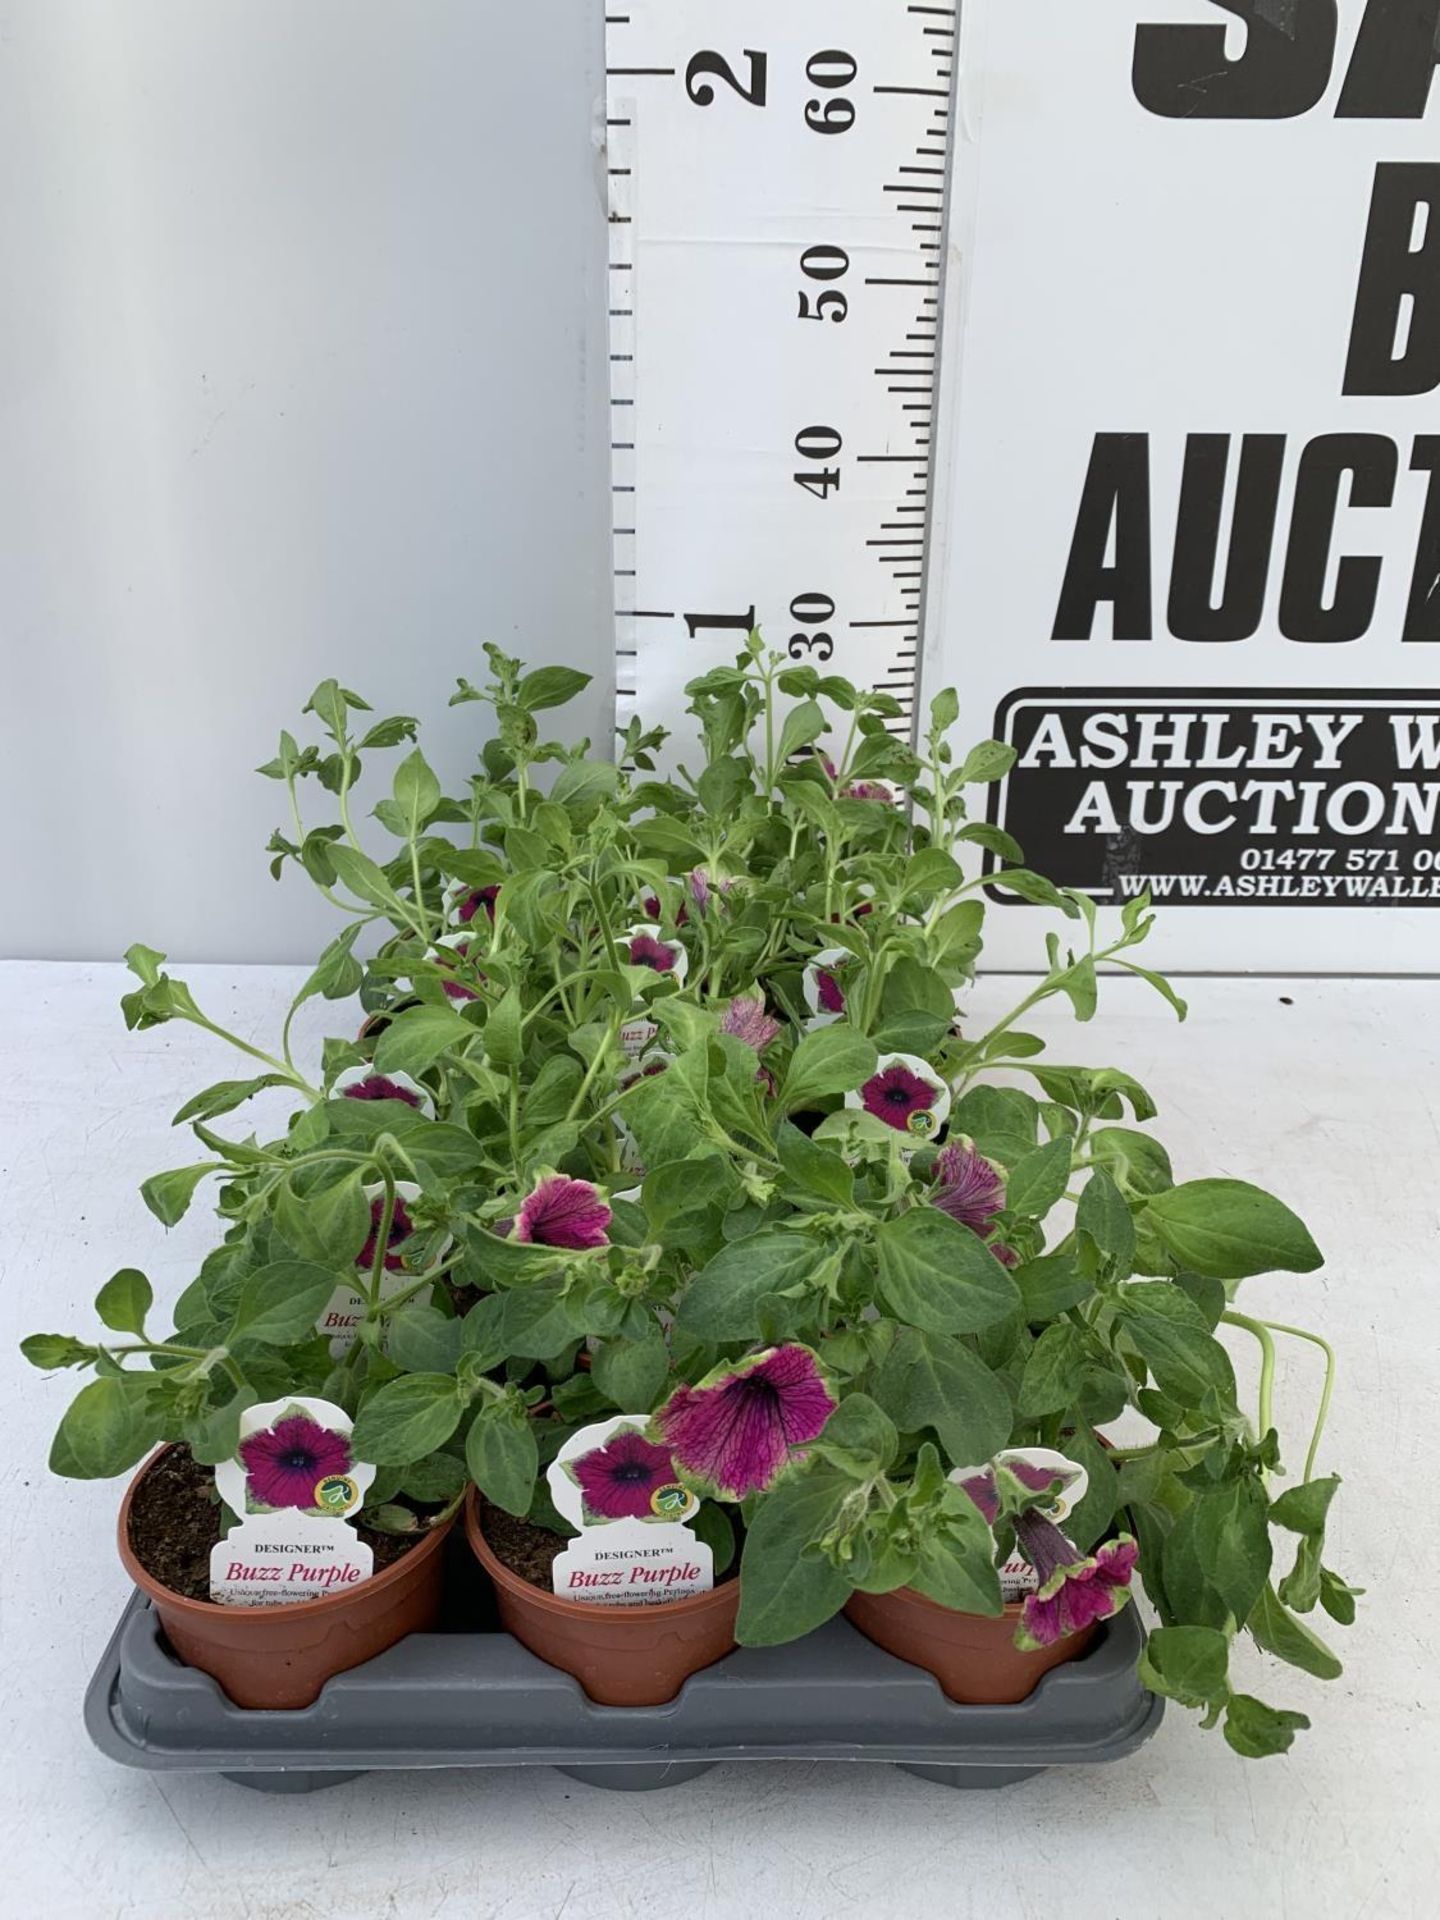 FIFTEEN PETUNIA BUZZ PURPLE BASKET PLANTS IN P9 POTS PLUS VAT TO BE SOLD FOR THE FIFTEEN - Image 2 of 6